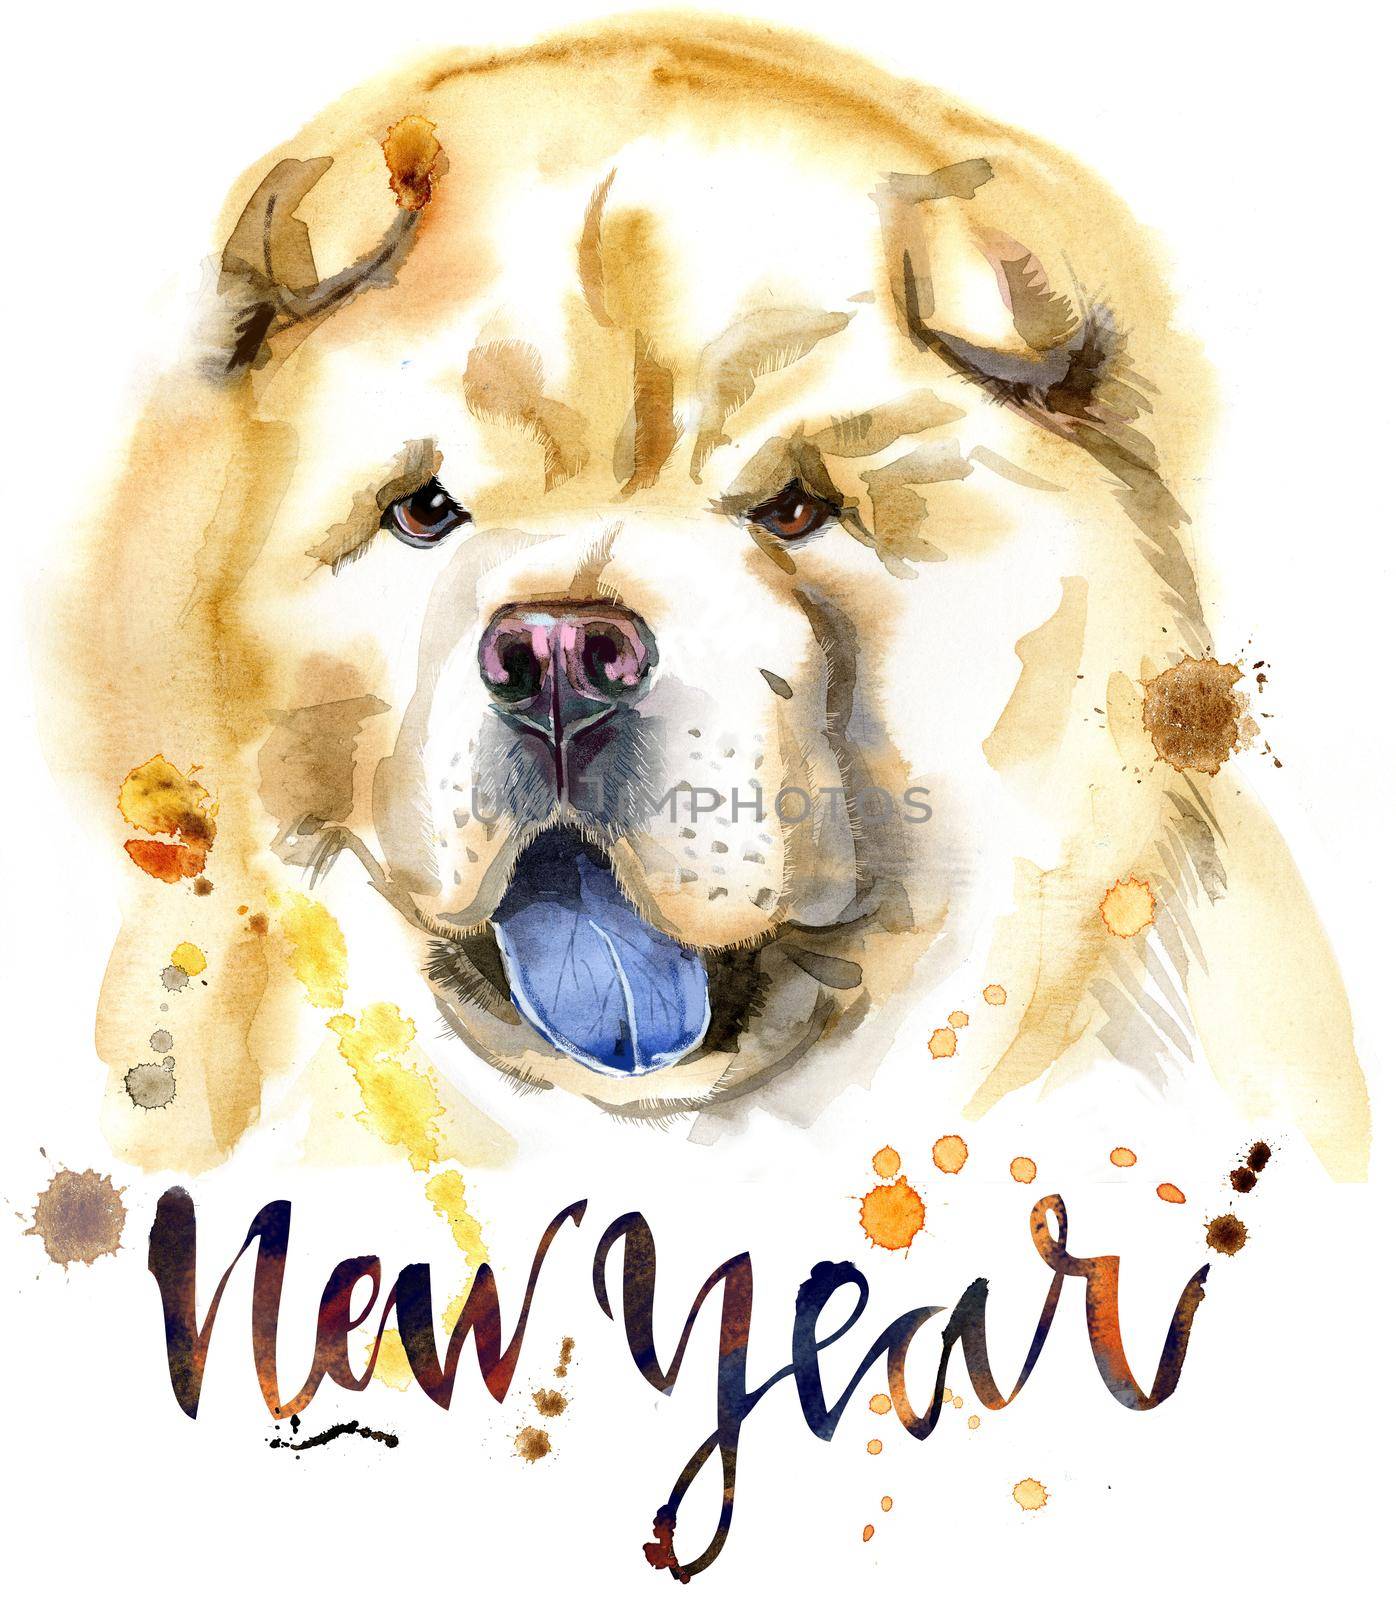 Cute Dog. Dog T-shirt graphics. watercolor chow-chow dog illustration with the inscription New Year